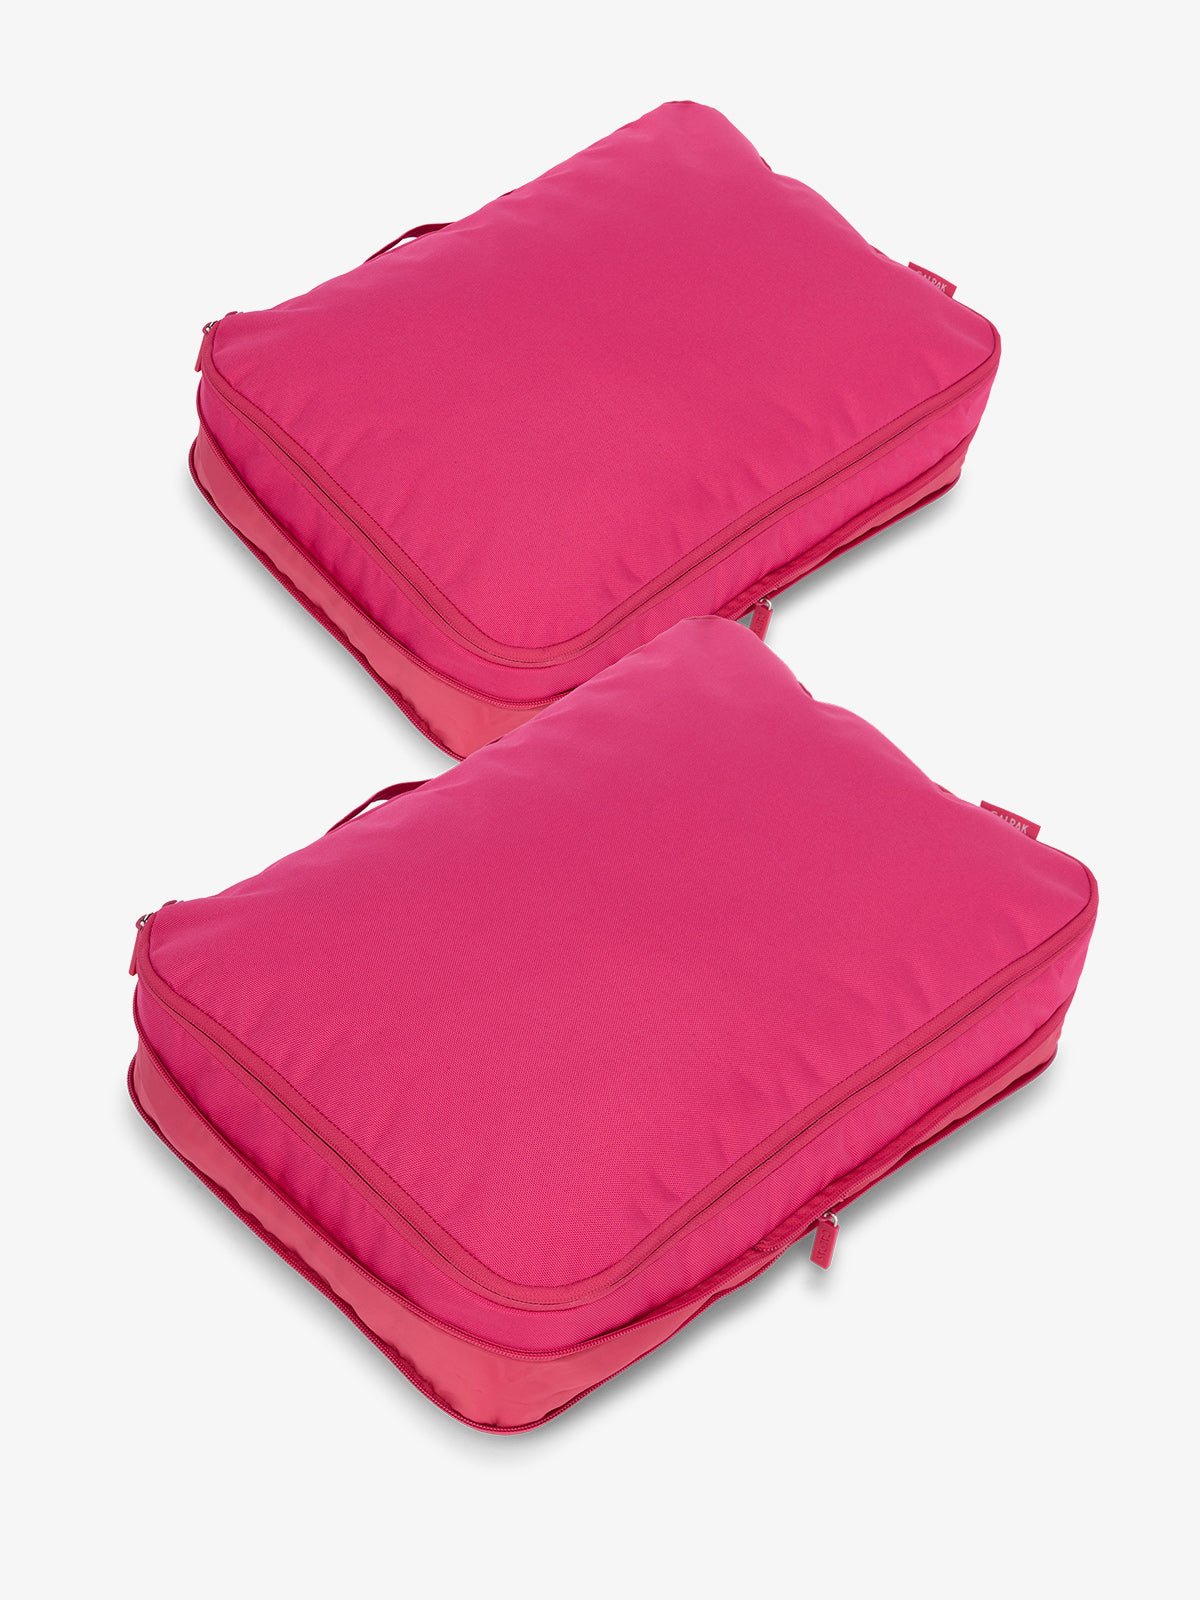 CALPAK large packing cubes with top handles and expandable by 4.5 inches in dragonfruit pink